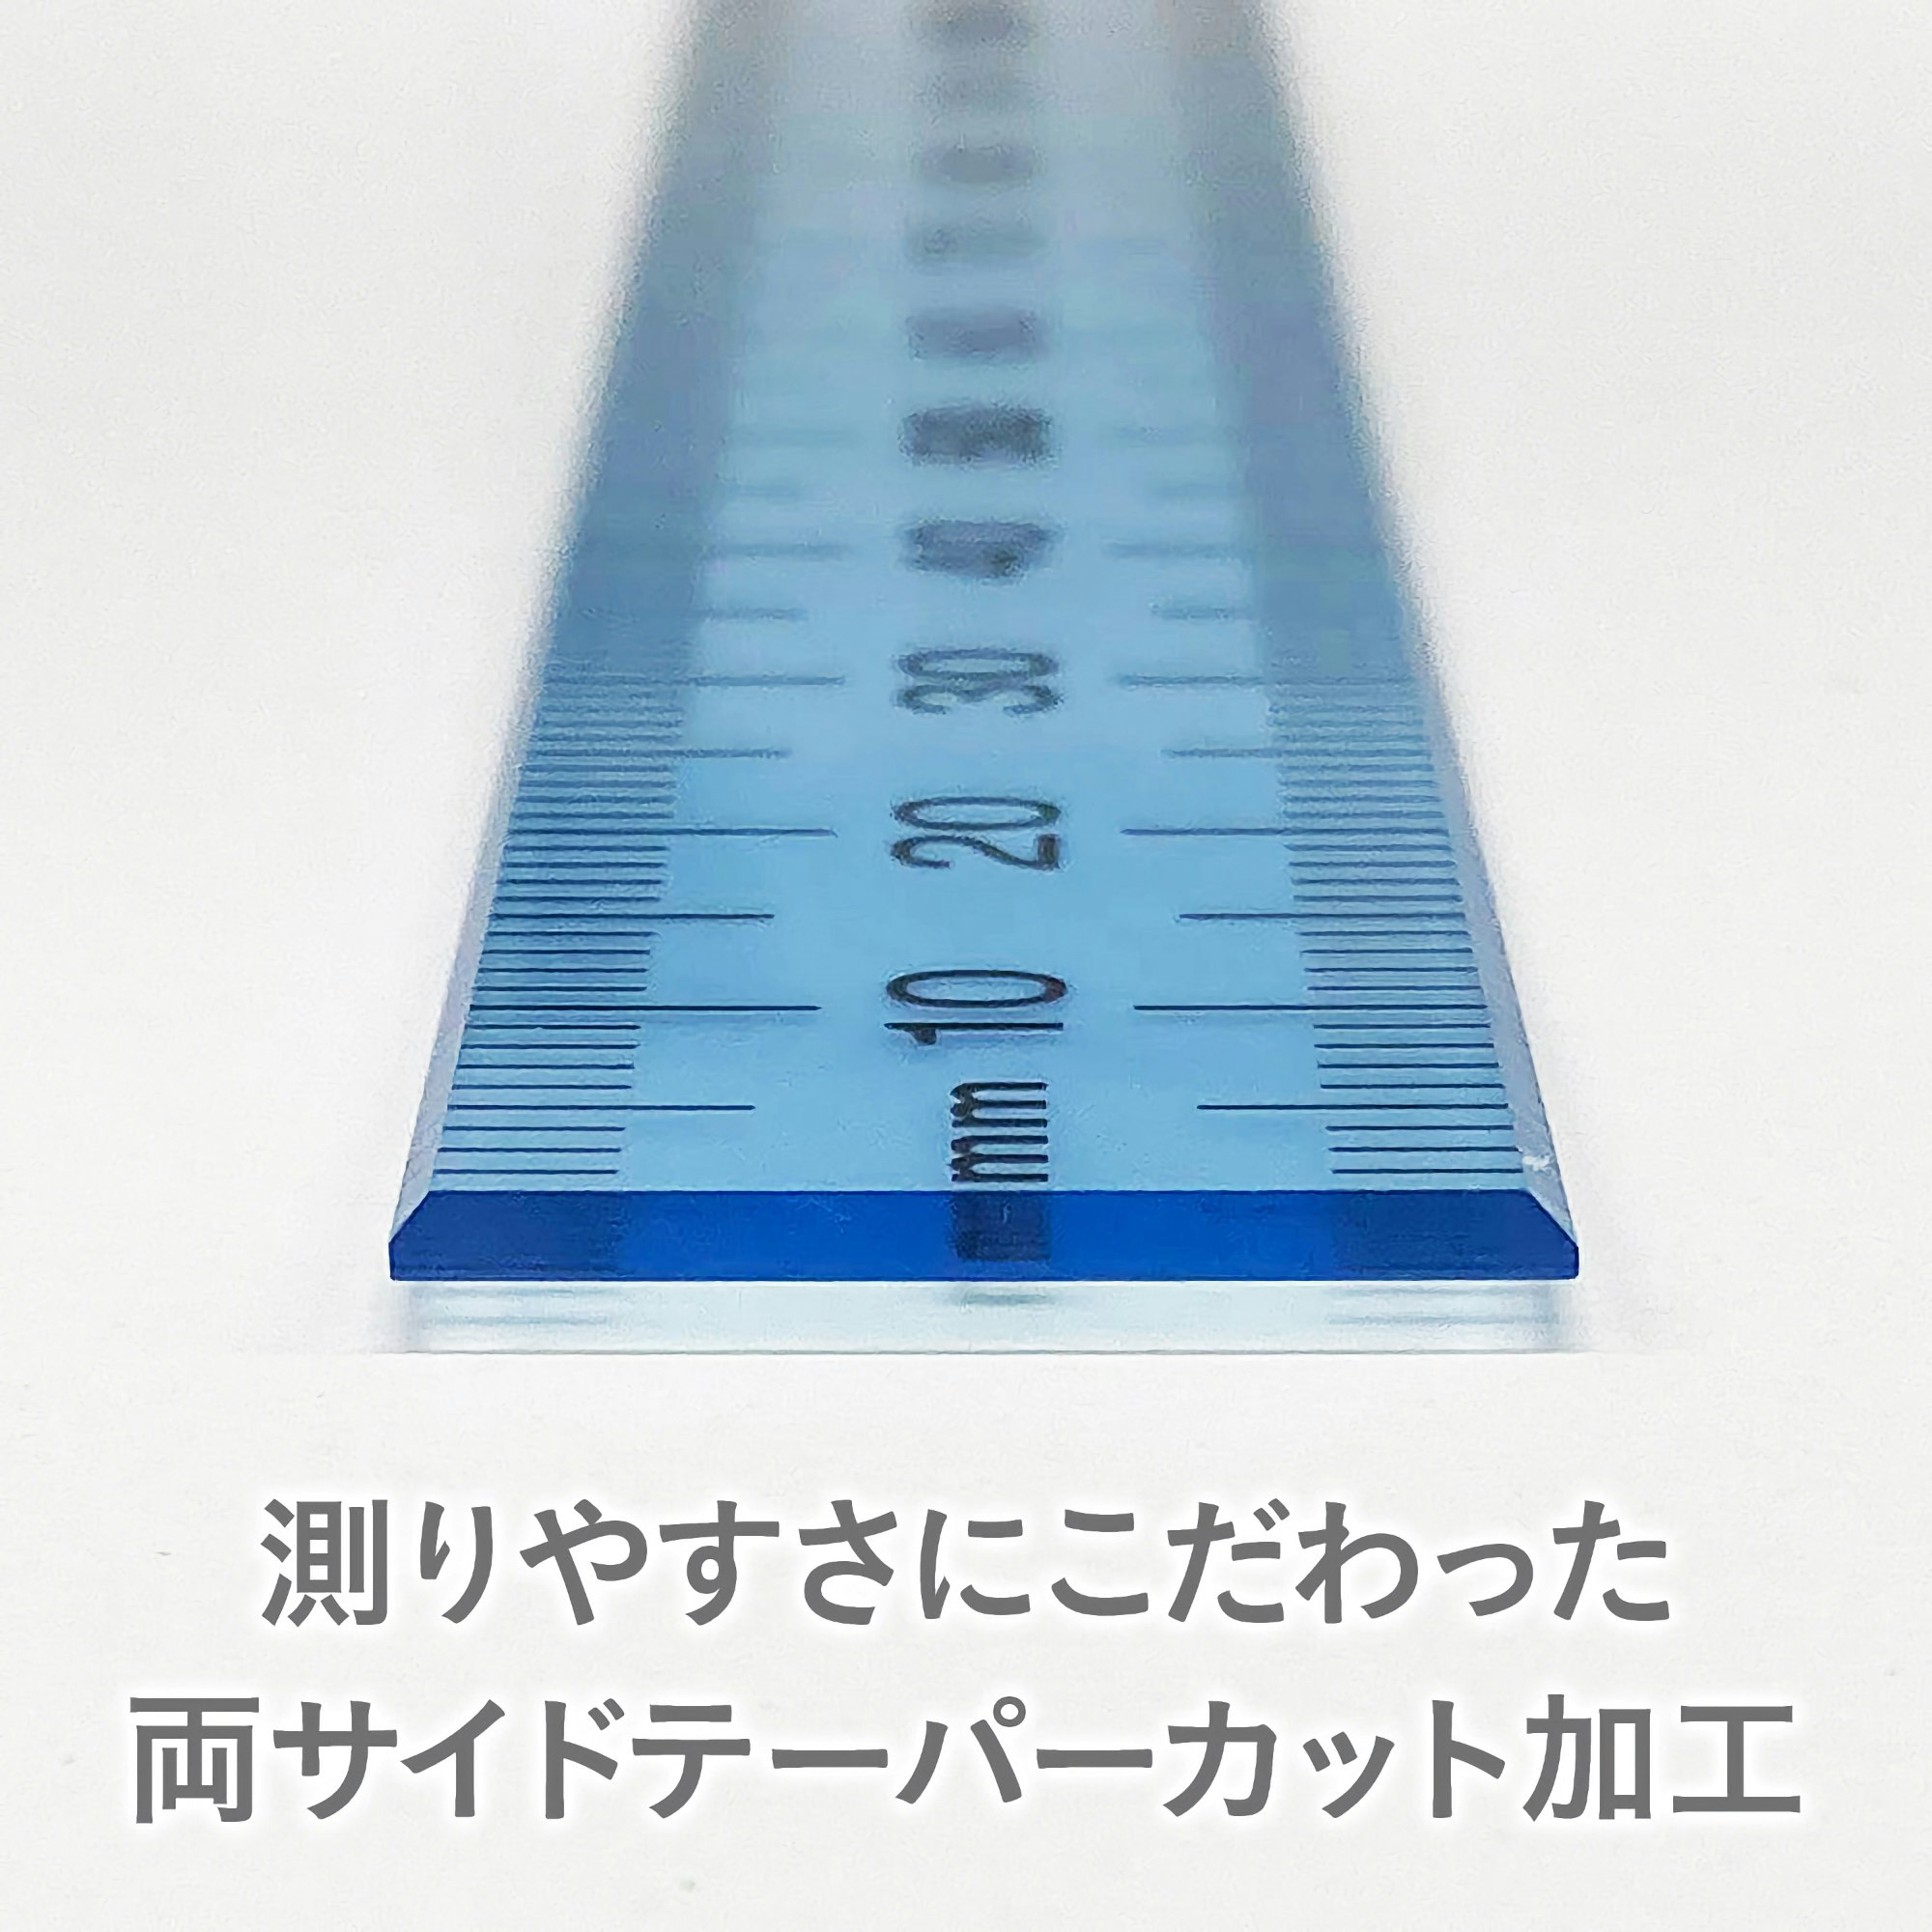 Kyoei Orions Nuance Color Ruler 16 cm Butterfly Pea